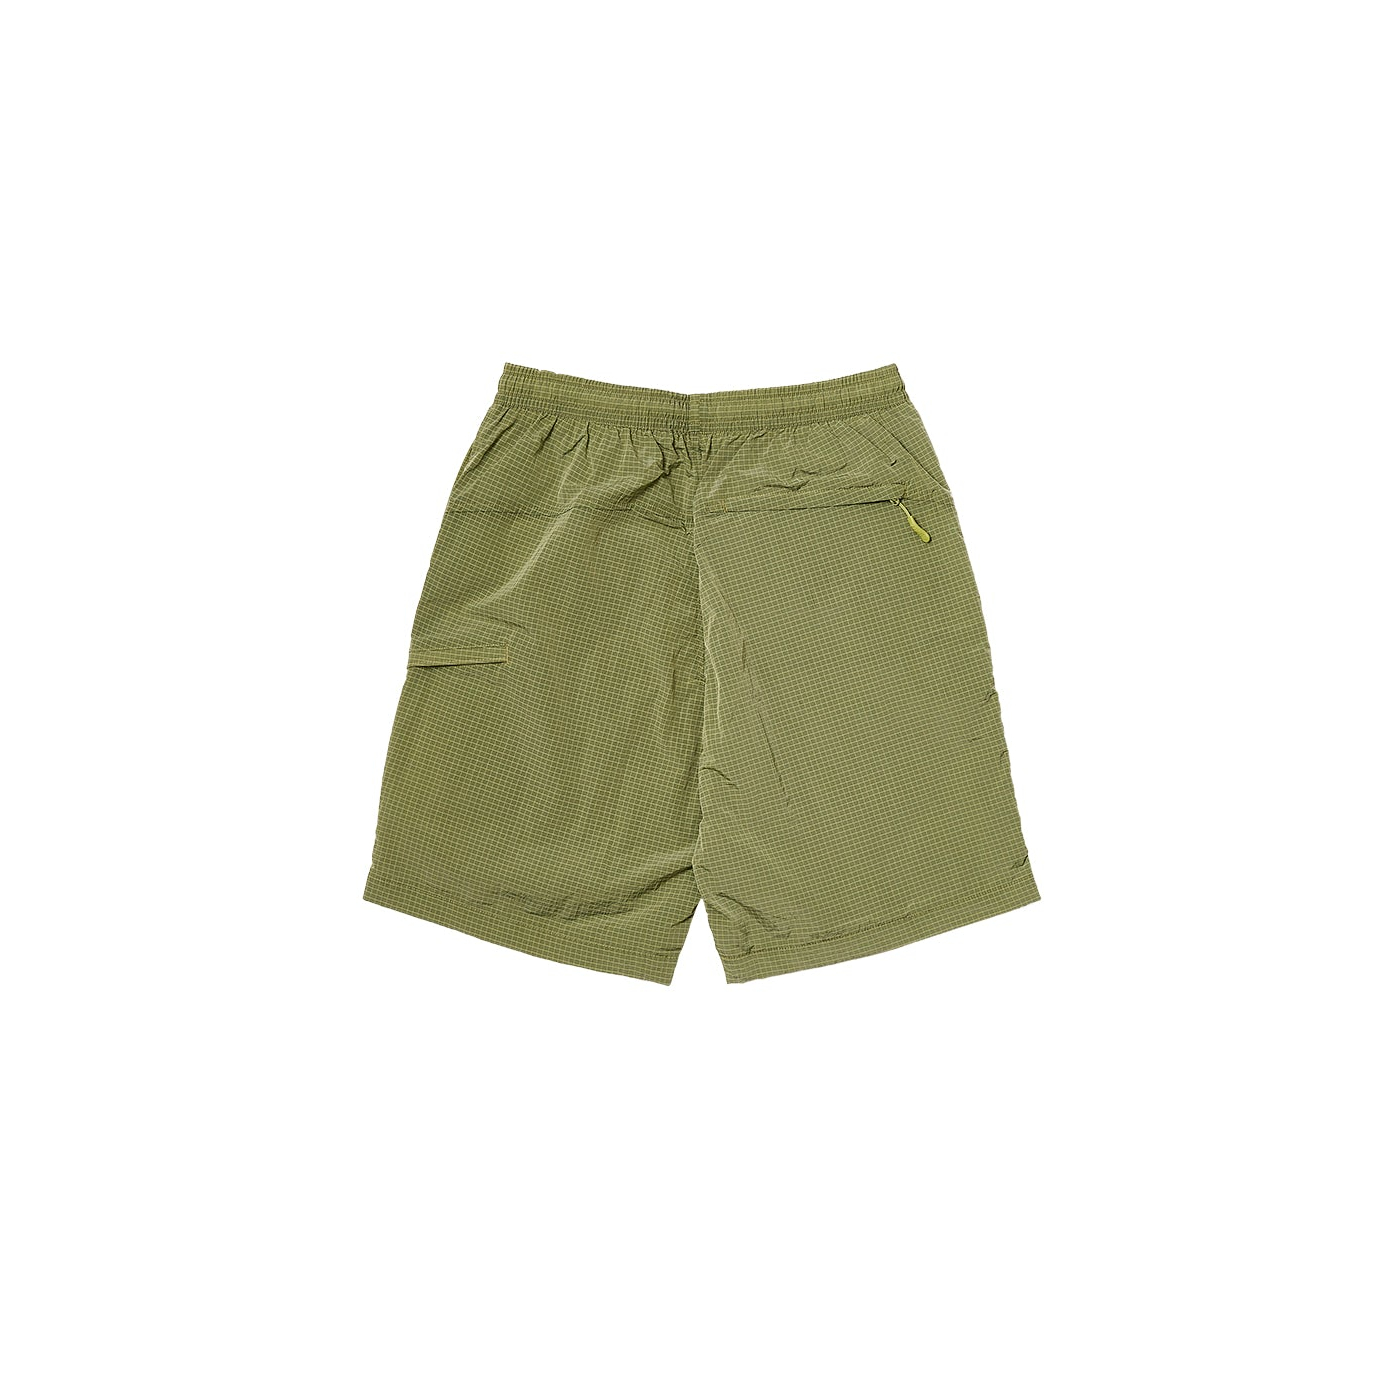 Thumbnail Y-RIPSTOP SHELL SHORT LIME one color